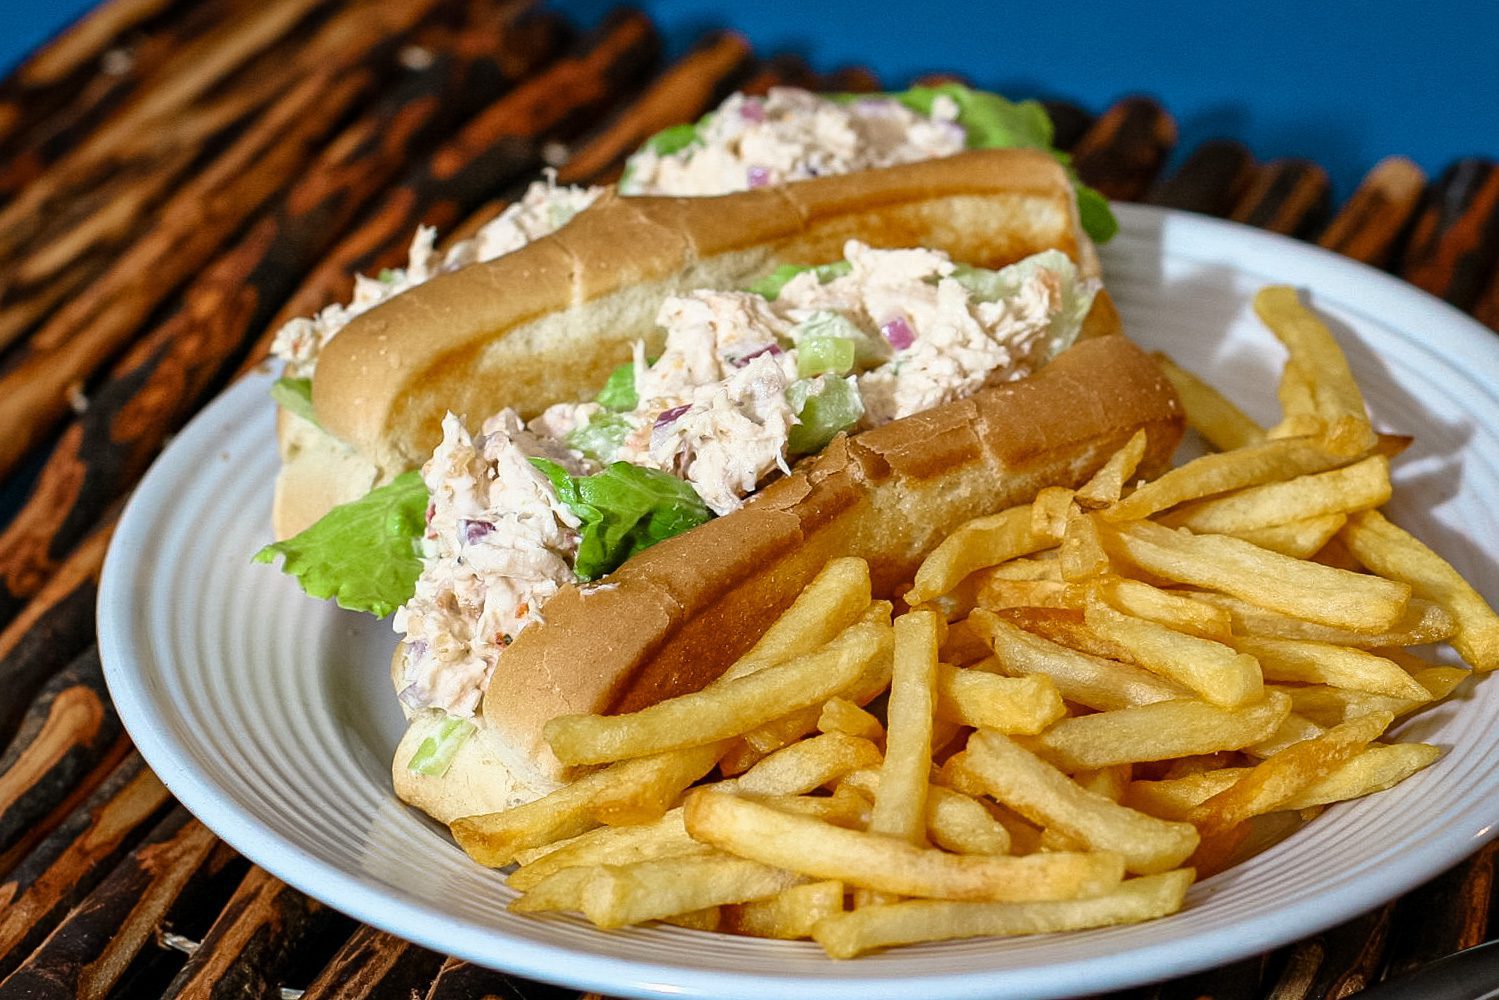 chicken salad sandwiches on buns with French fries on the side